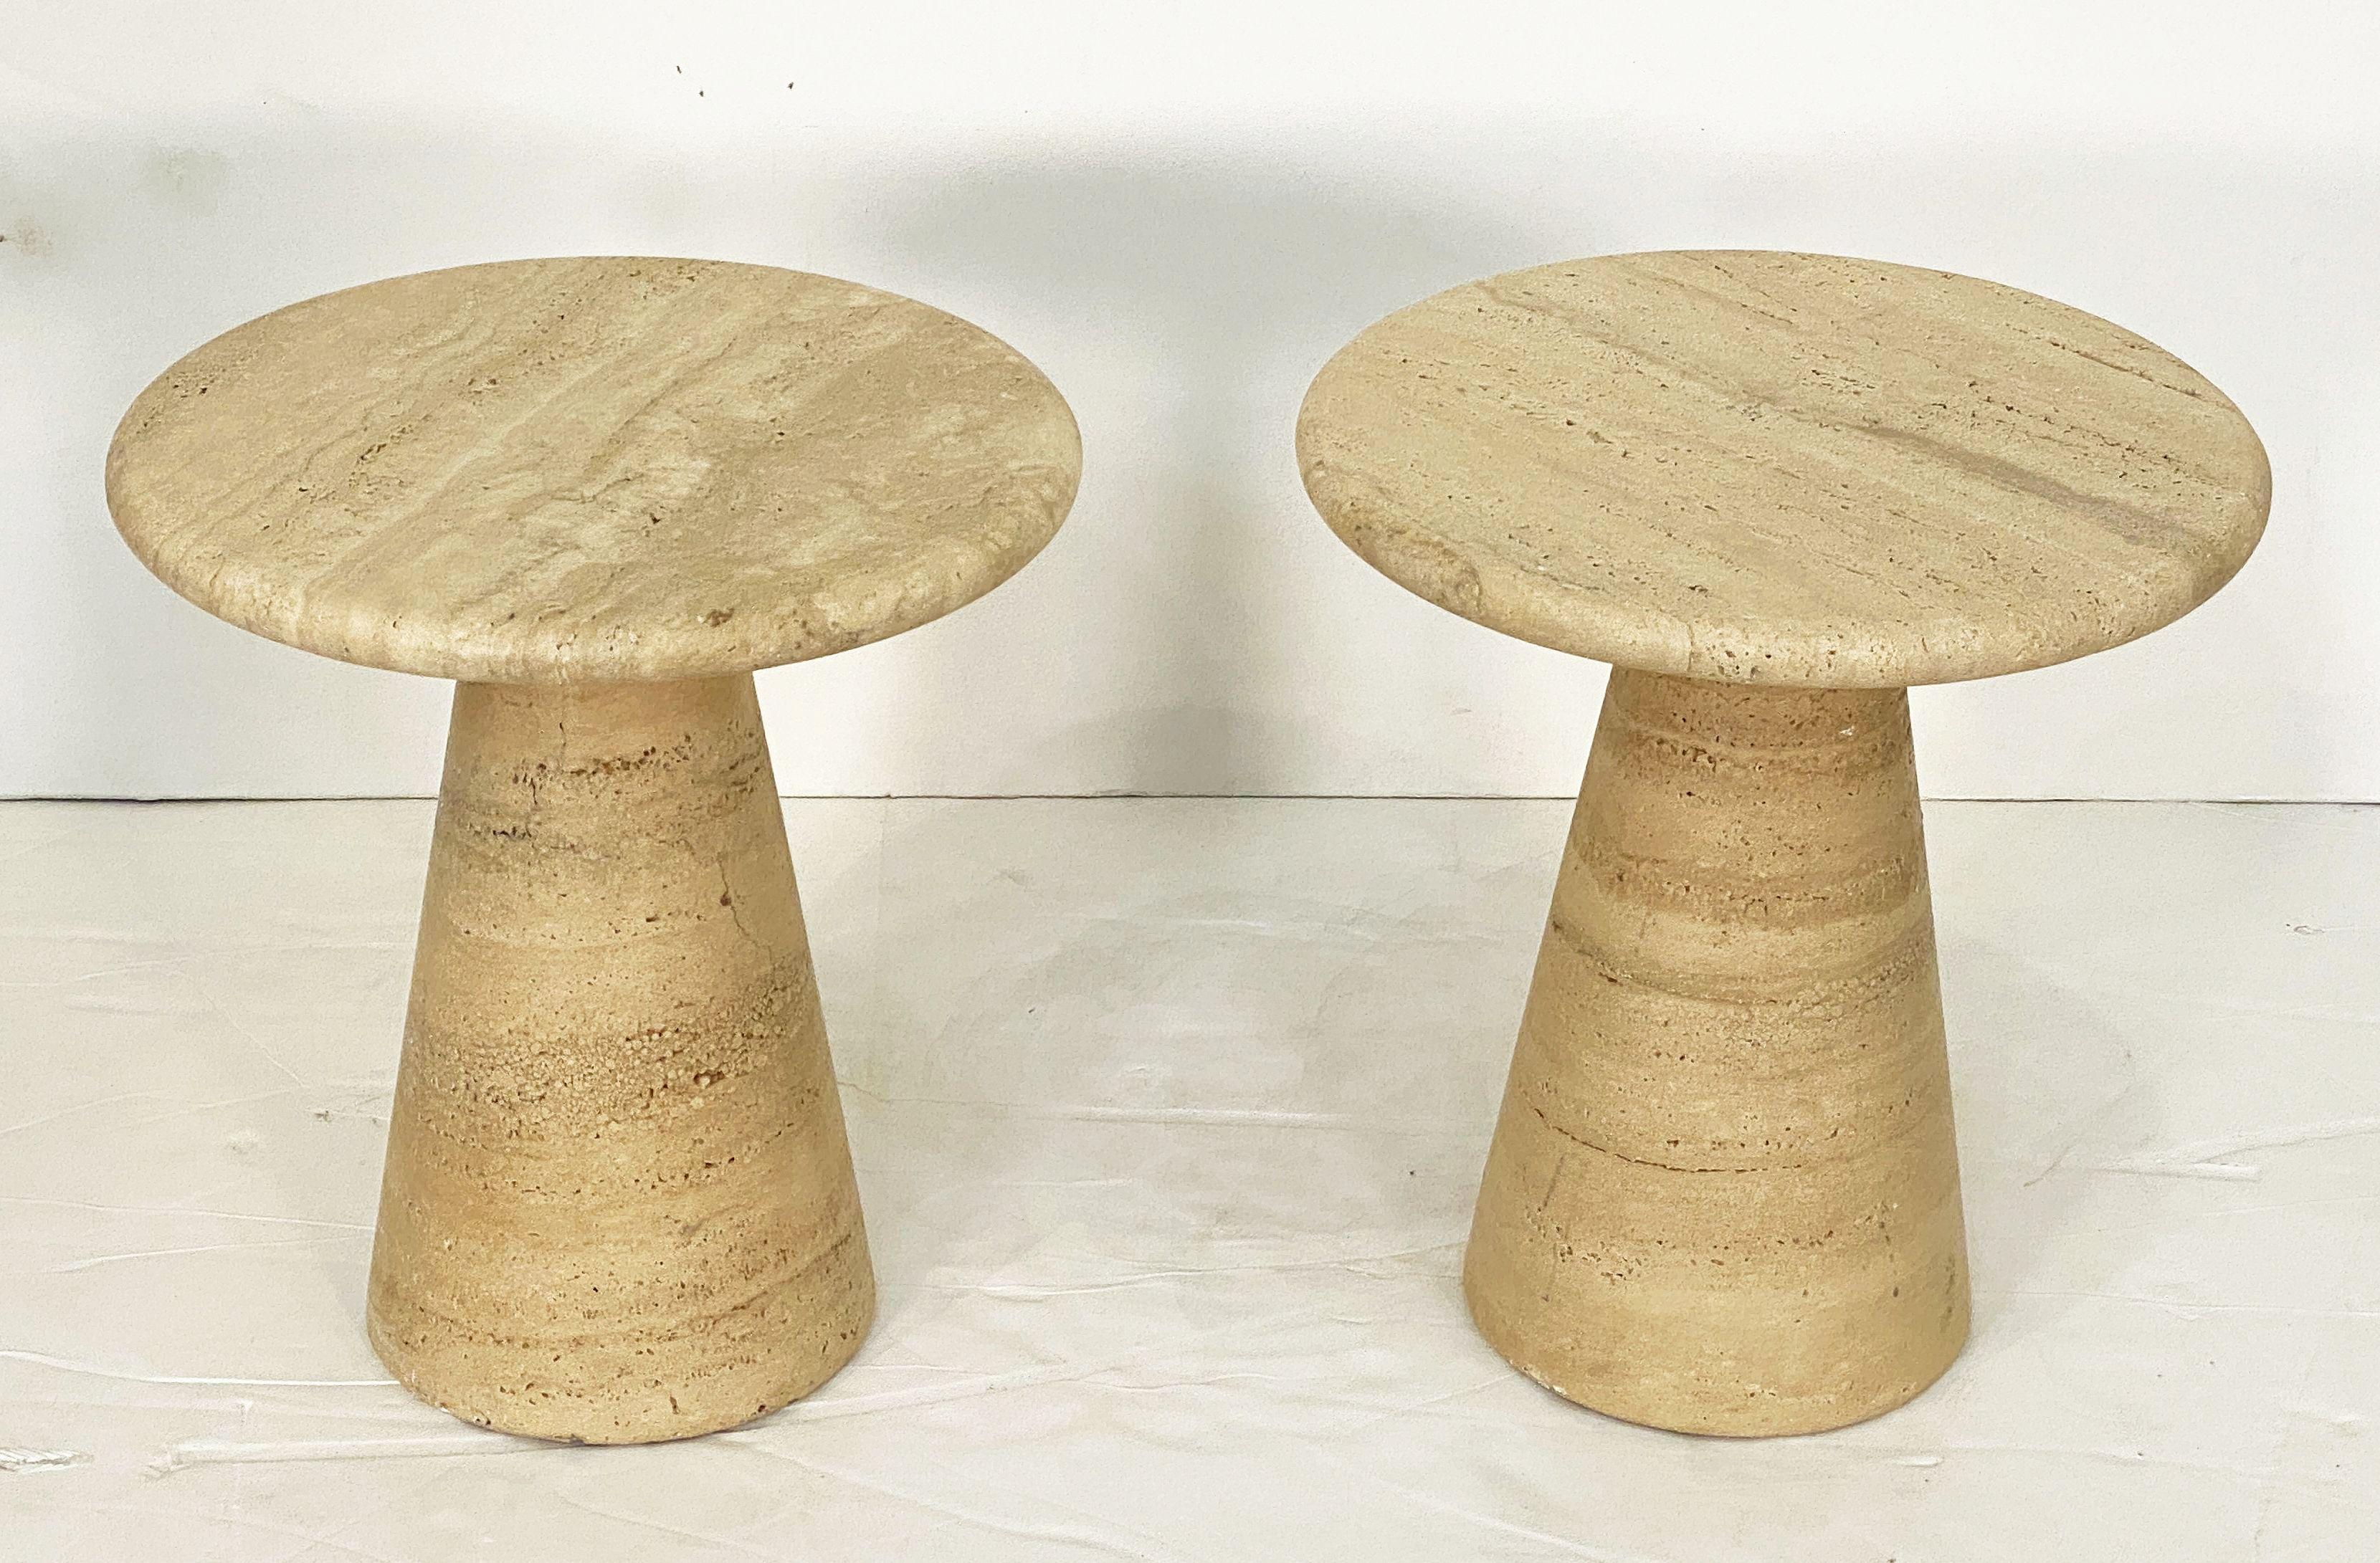 Modernist Conical Table of Travertine Stone from Italy (Four Available) For Sale 7